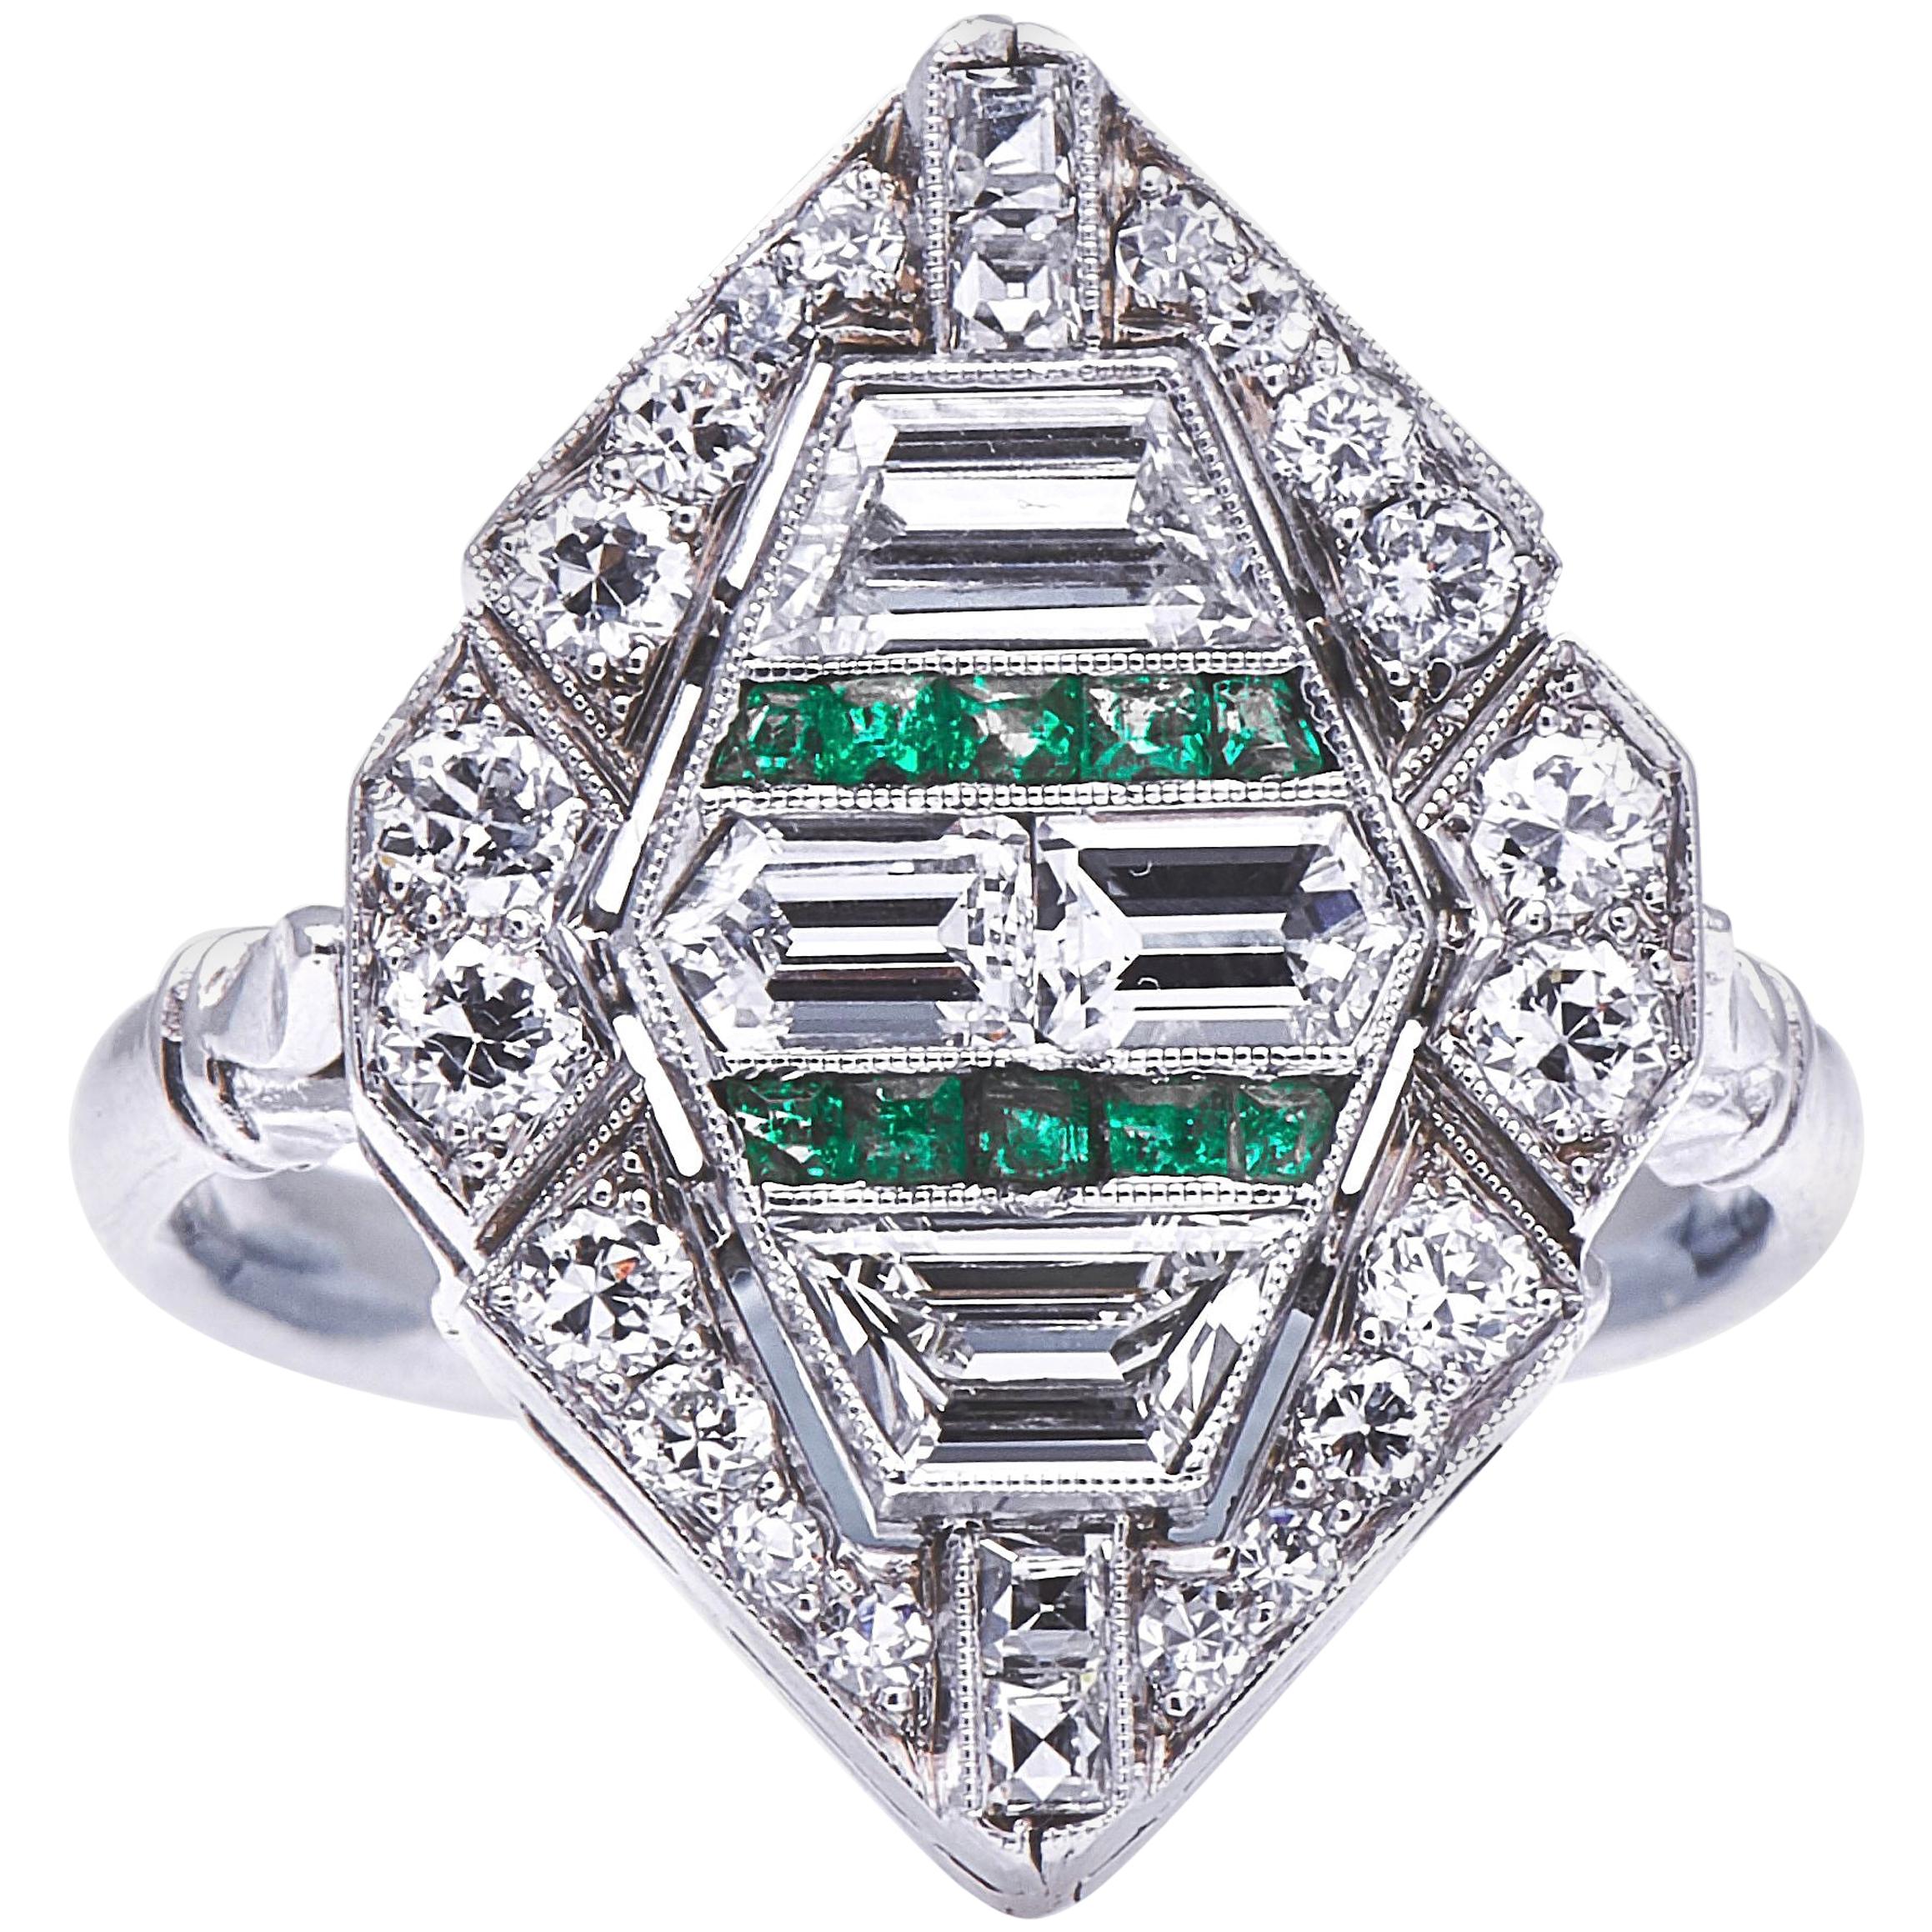 Stunning Antique, Art Deco, 18 Carat Gold, Emerald and Diamond Cluster Ring For Sale